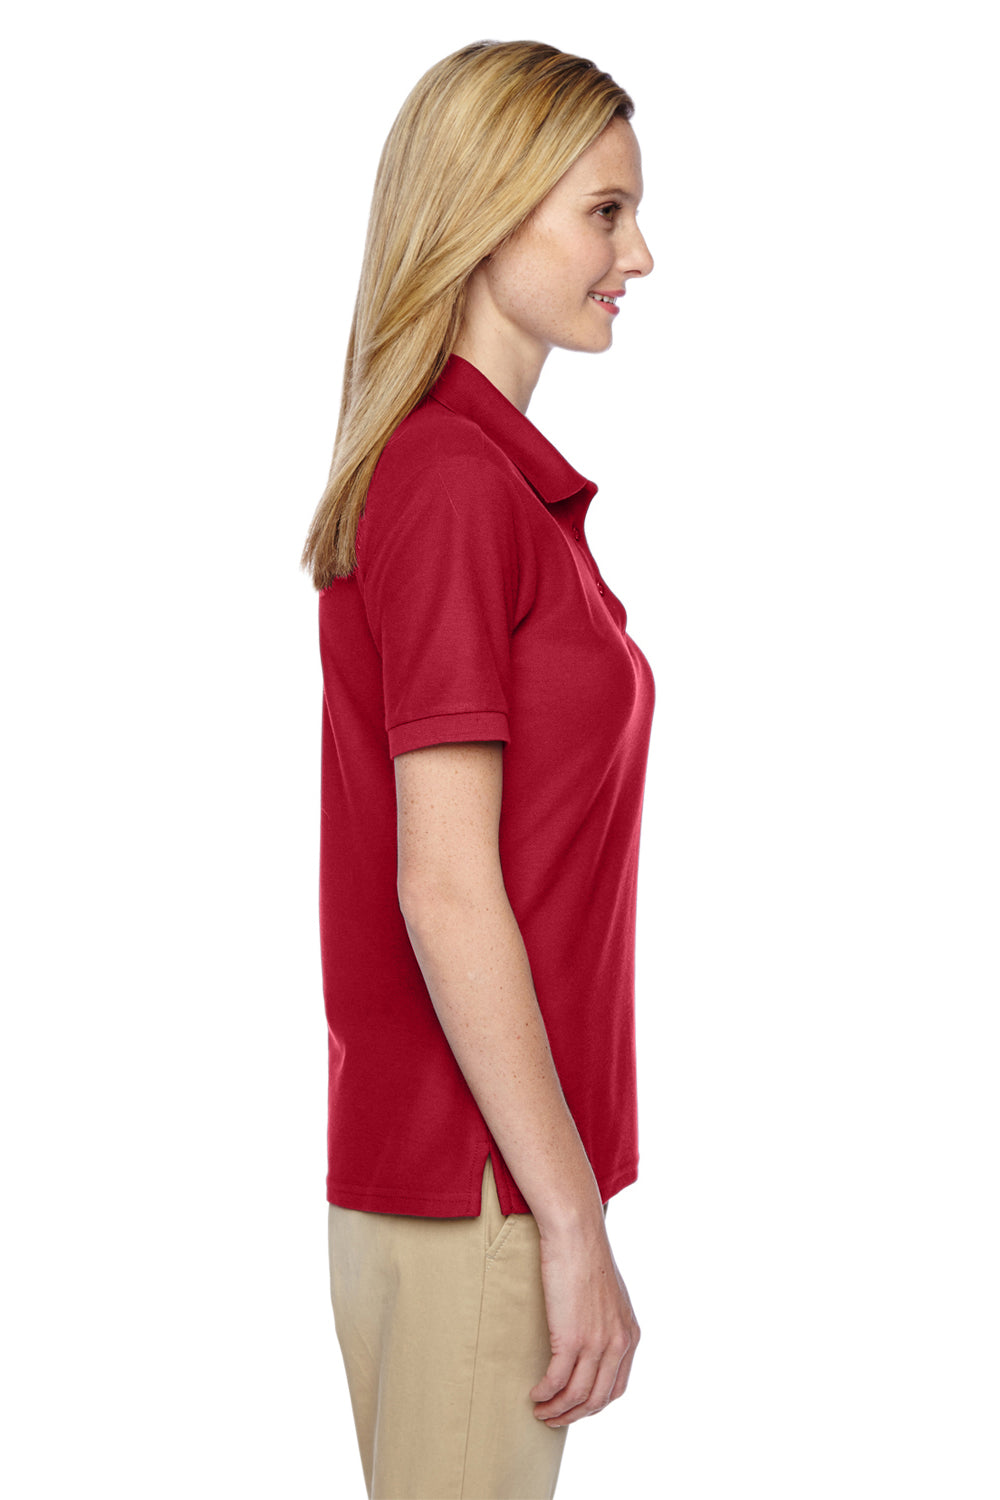 Jerzees 537WR Womens Easy Care Moisture Wicking Short Sleeve Polo Shirt Red Side